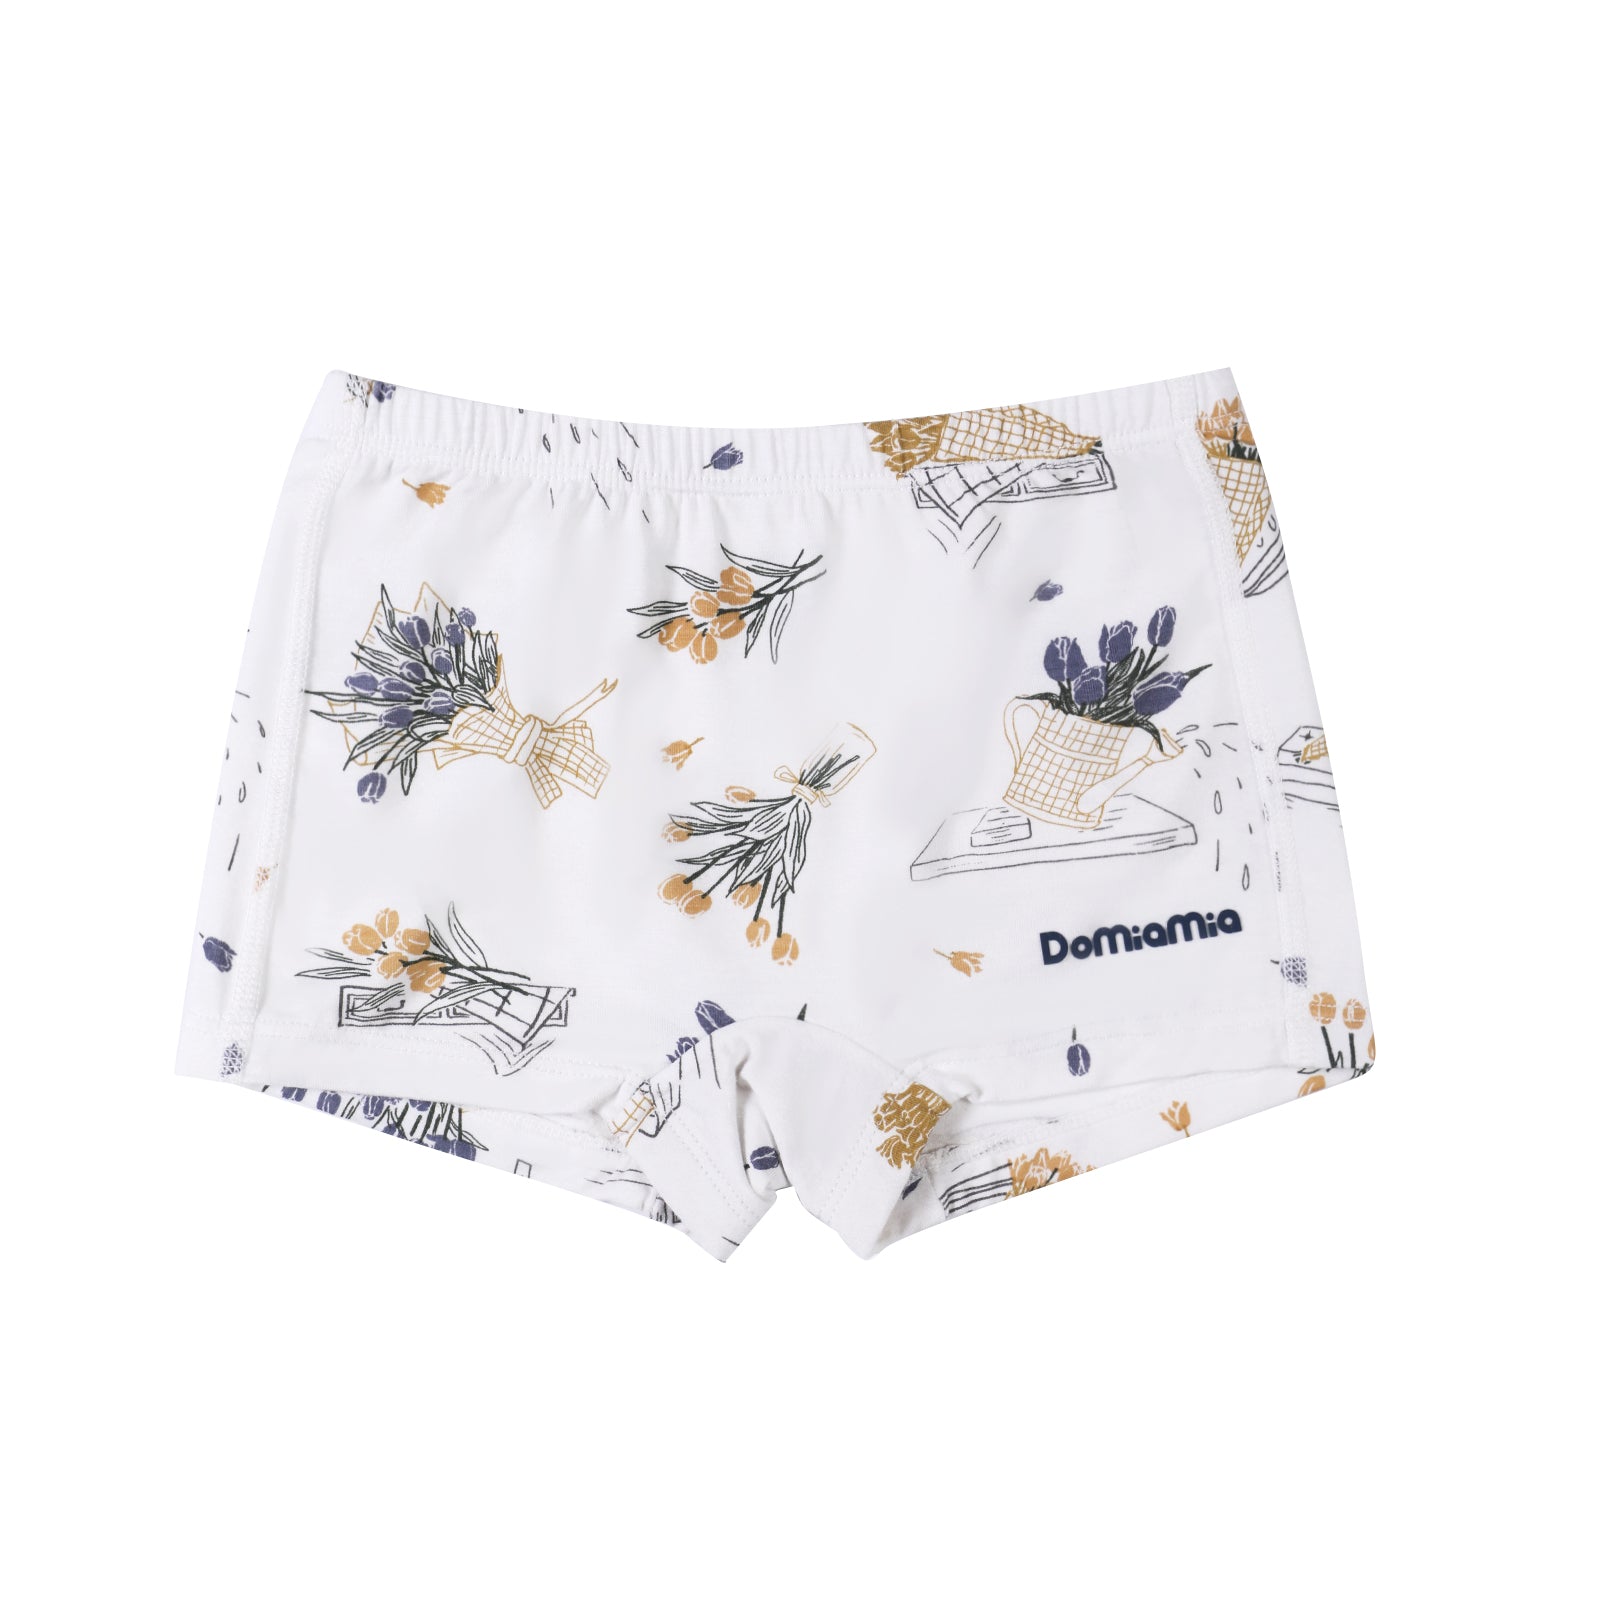 Domiamia-Baby-Girls-Shorts-Panties-floral-2